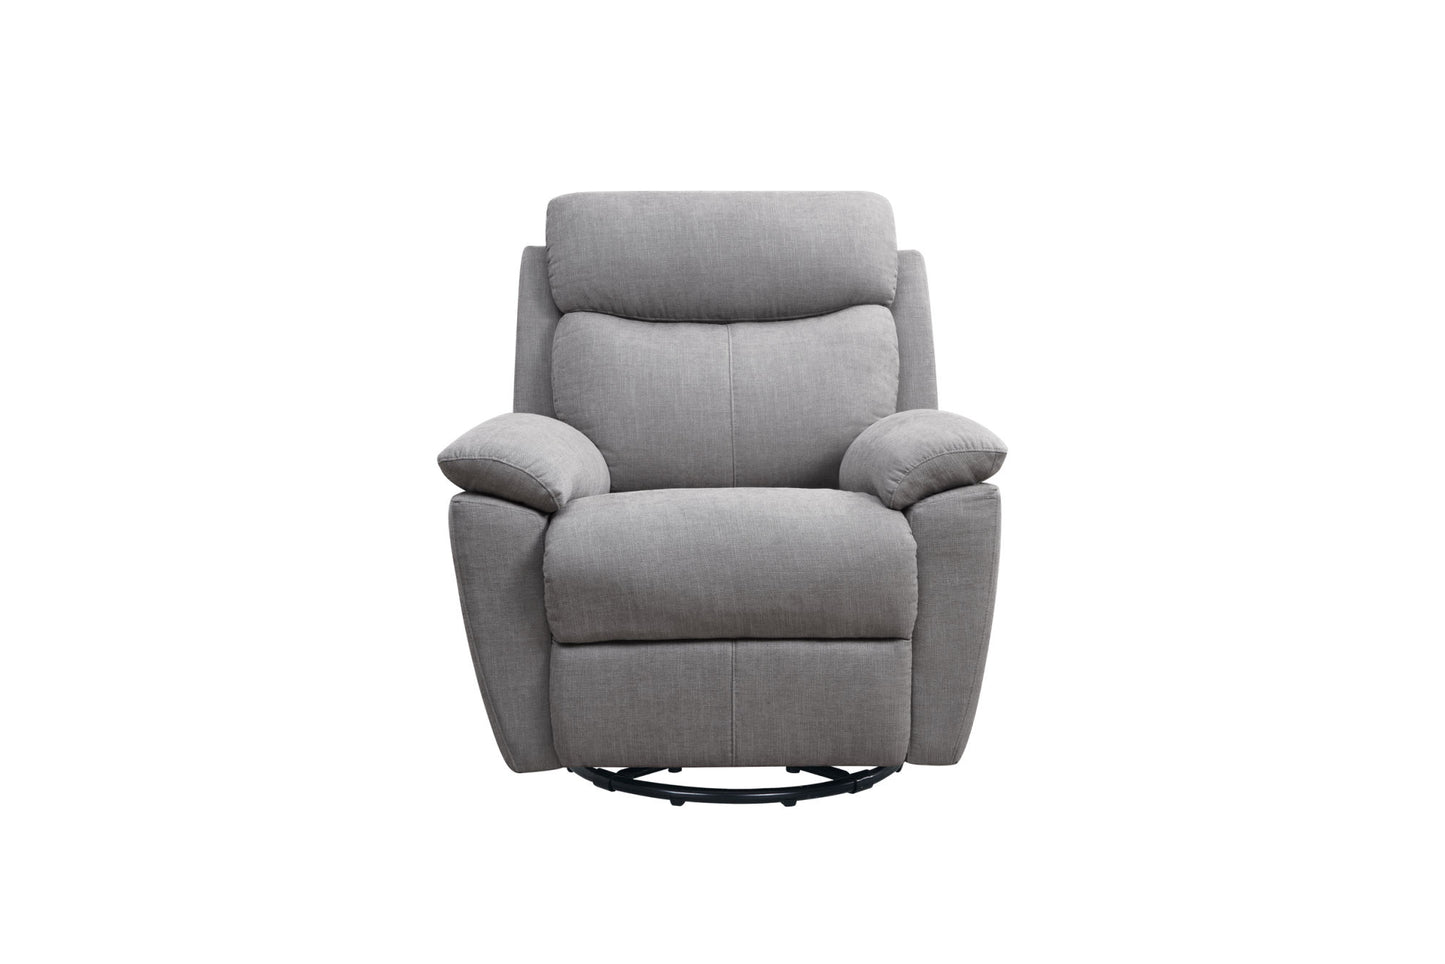 Electric Power Swivel Glider Rocker Recliner Chair with USB Charge Port - Light Grey